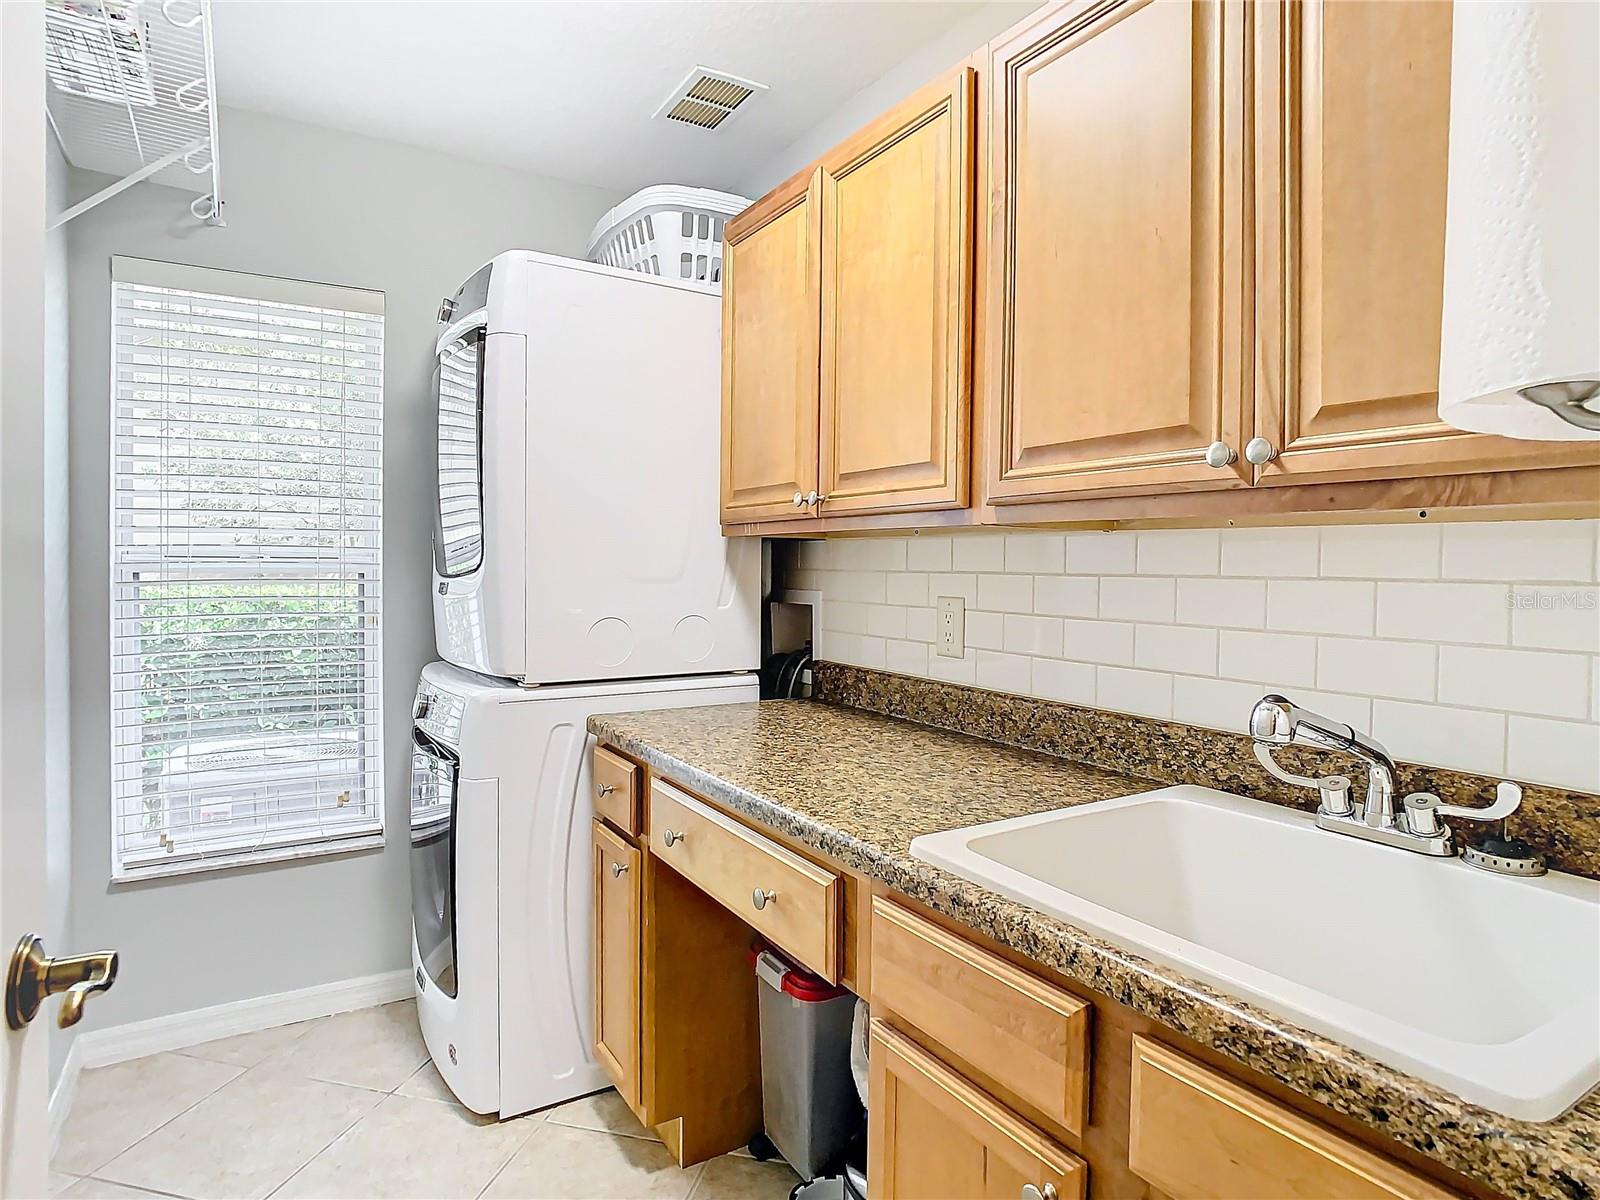 Very spacious laundry room downstairs